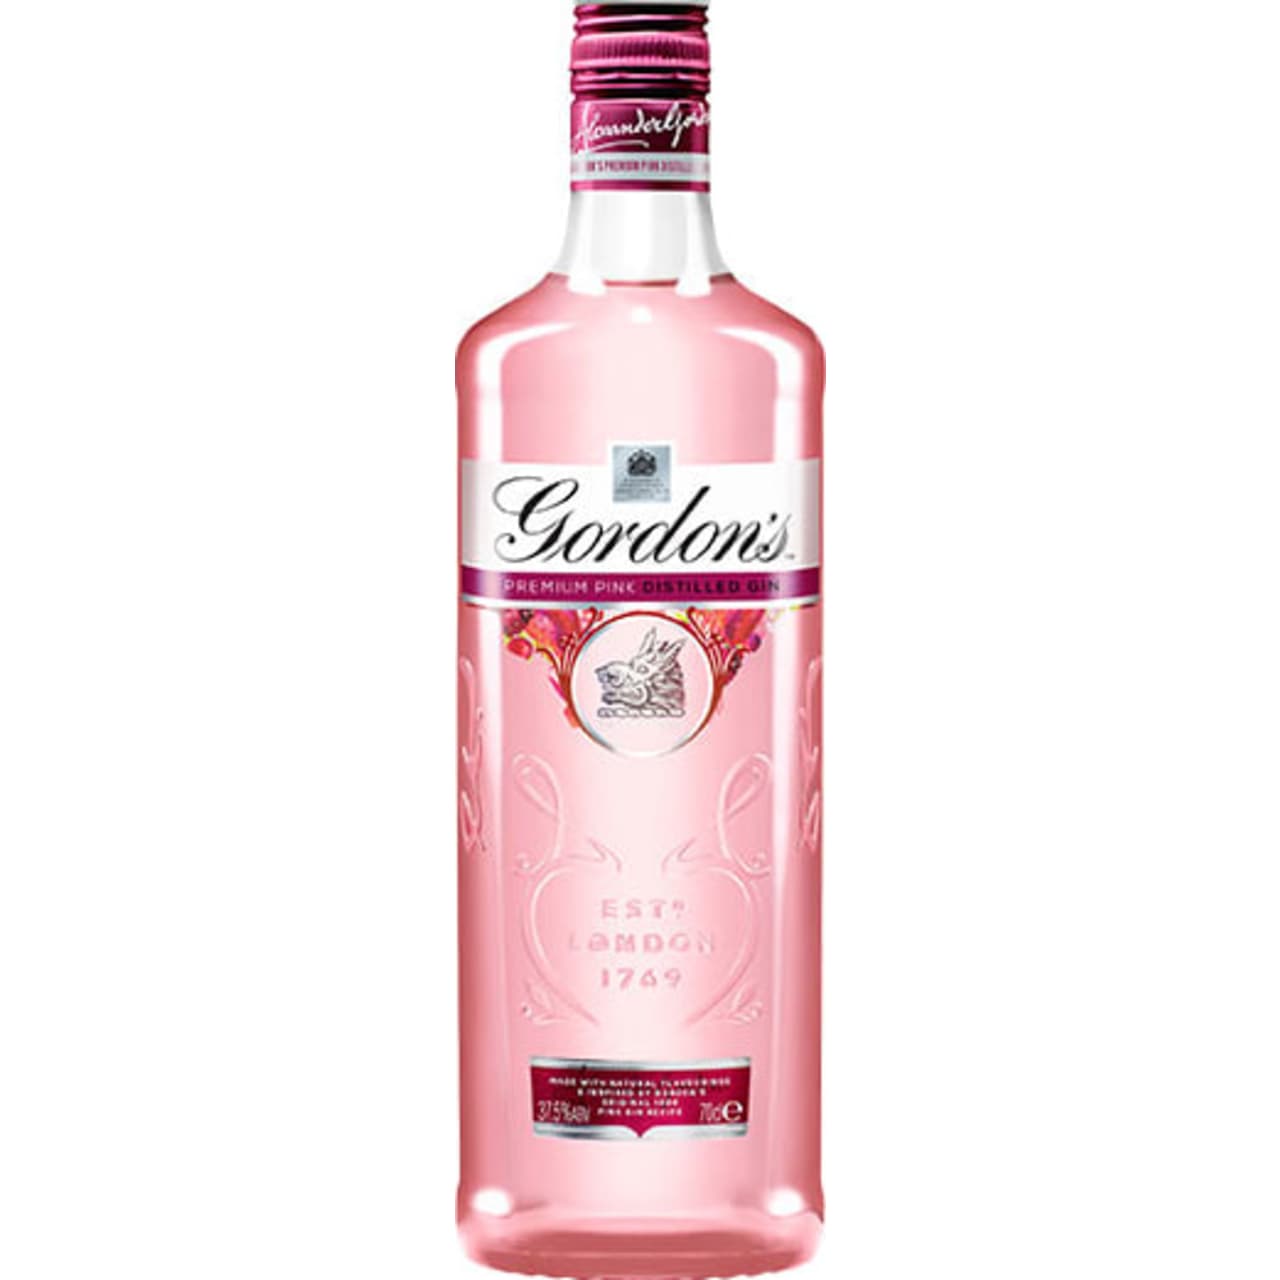 Inspired by an original Gordon’s recipe from the 1880s, Gordon’s Pink is perfectly crafted to balance the refreshing taste of Gordon’s with the natural sweetness of raspberries and strawberries, with the tang of redcurrant served up in a unique blushing tone.